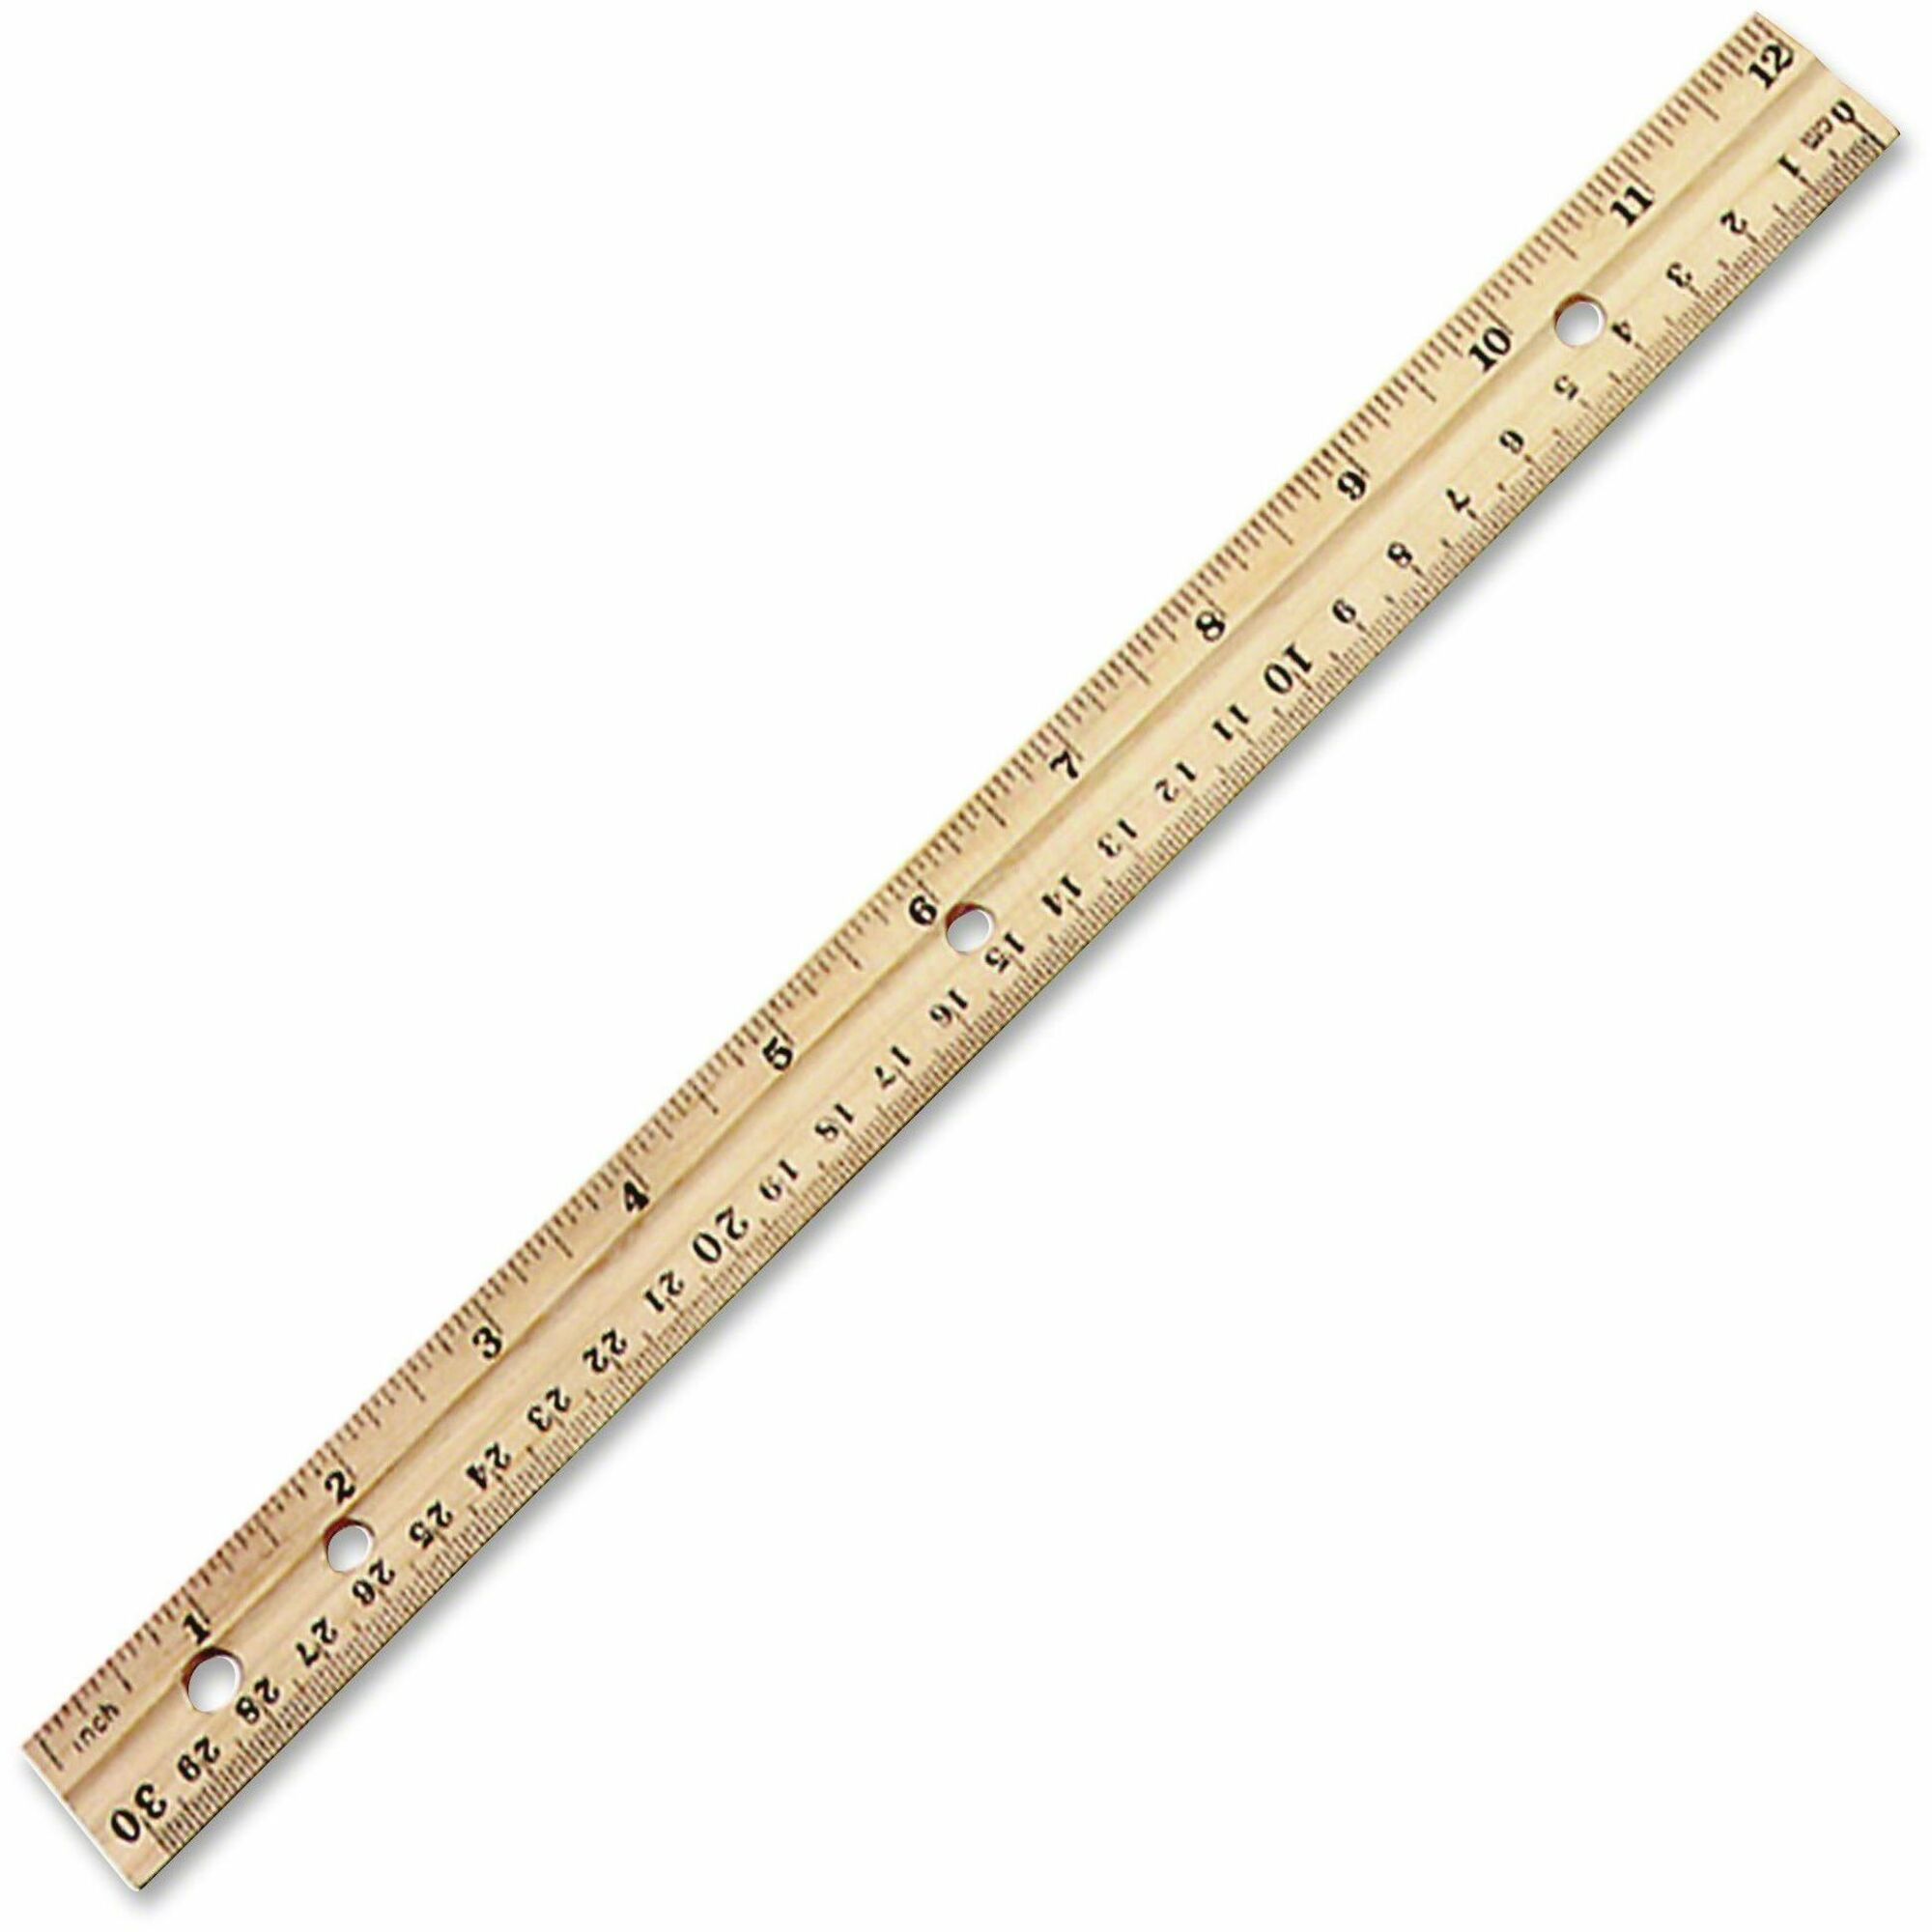 Hole Punched Wood Ruler English and Metric With Metal Edge, 12 - Supply Box